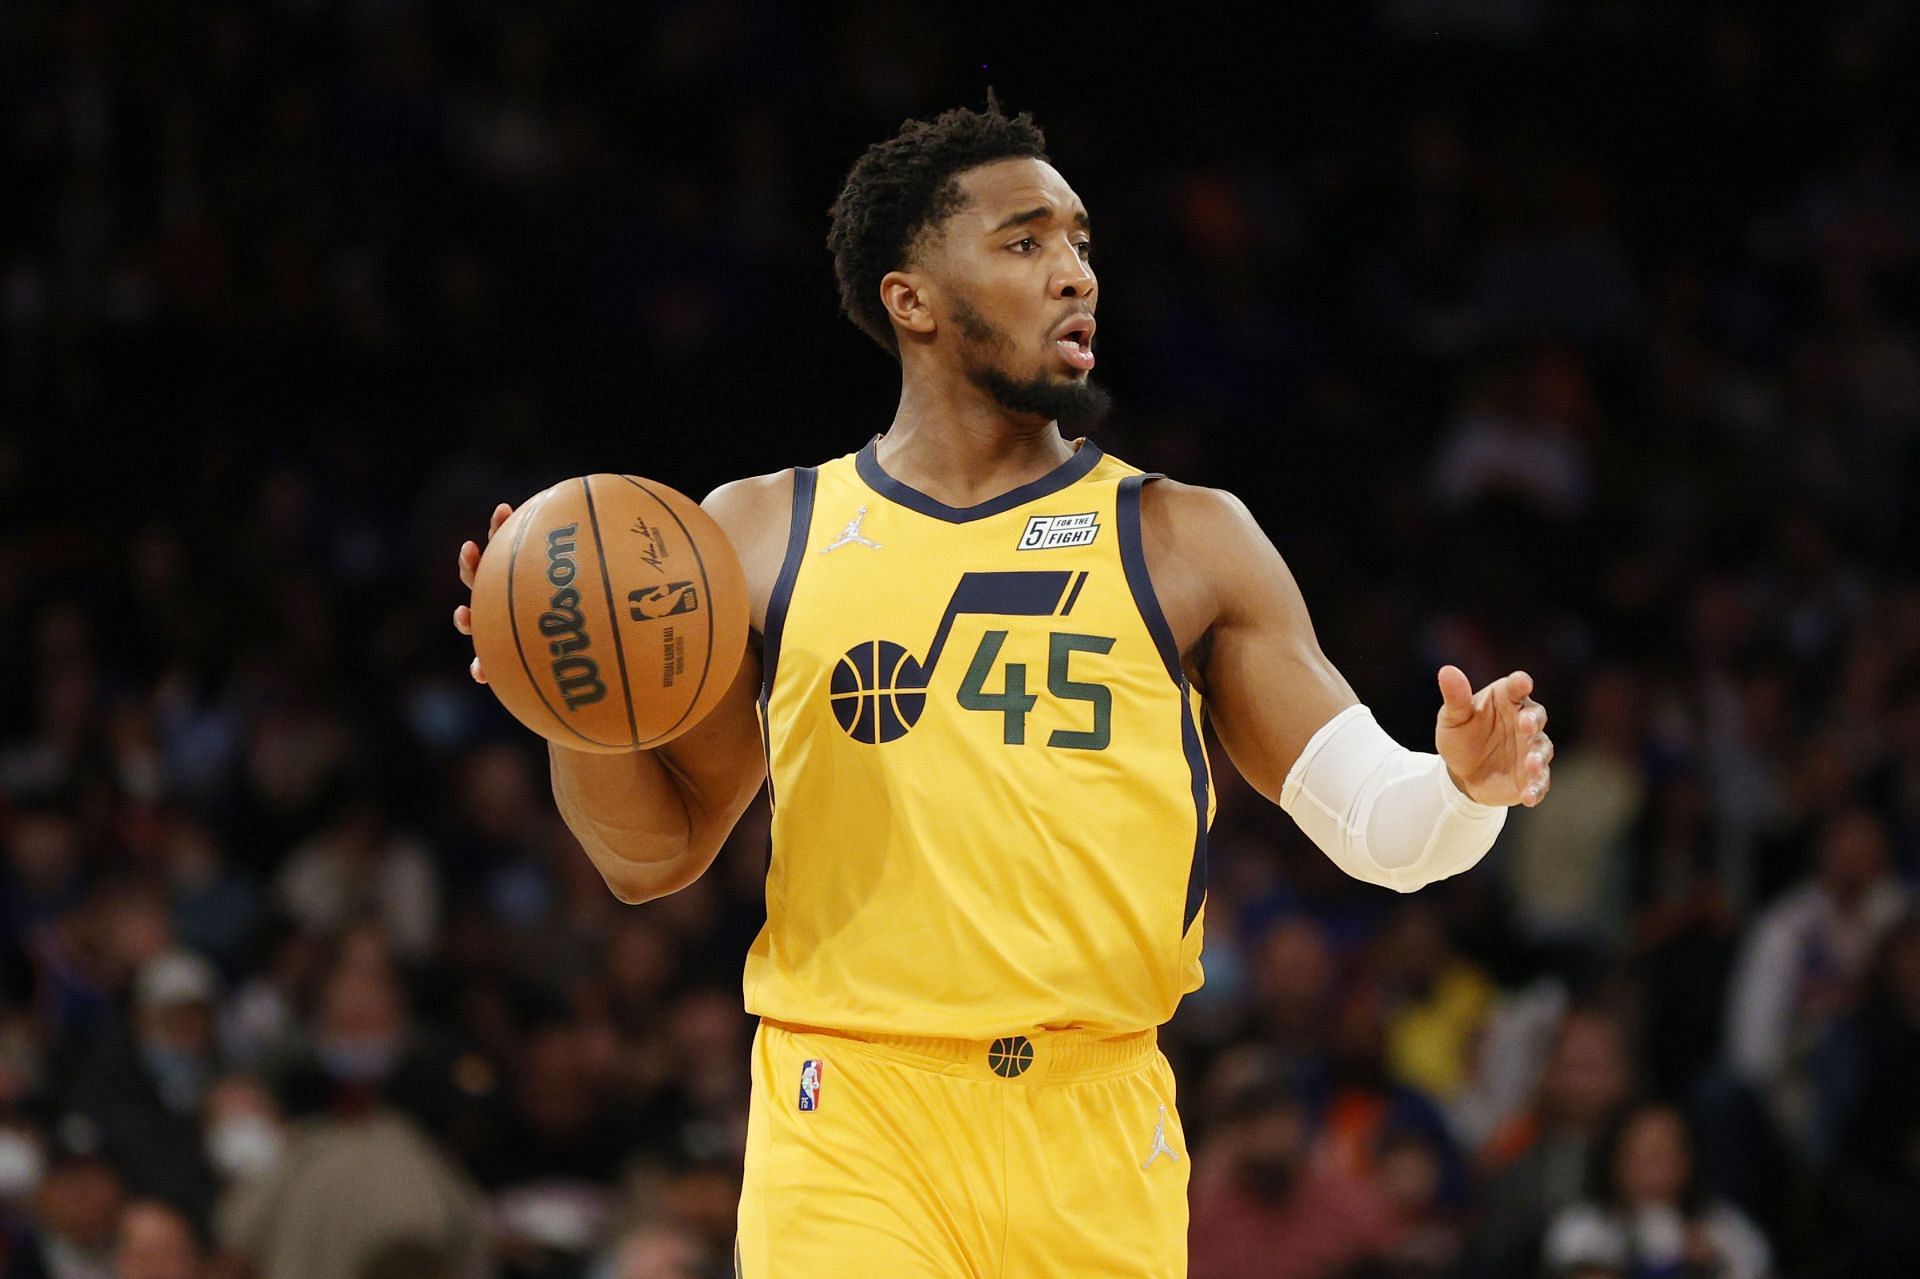 Many in the NBA thought the Knicks would acquire Donovan Mitchell.